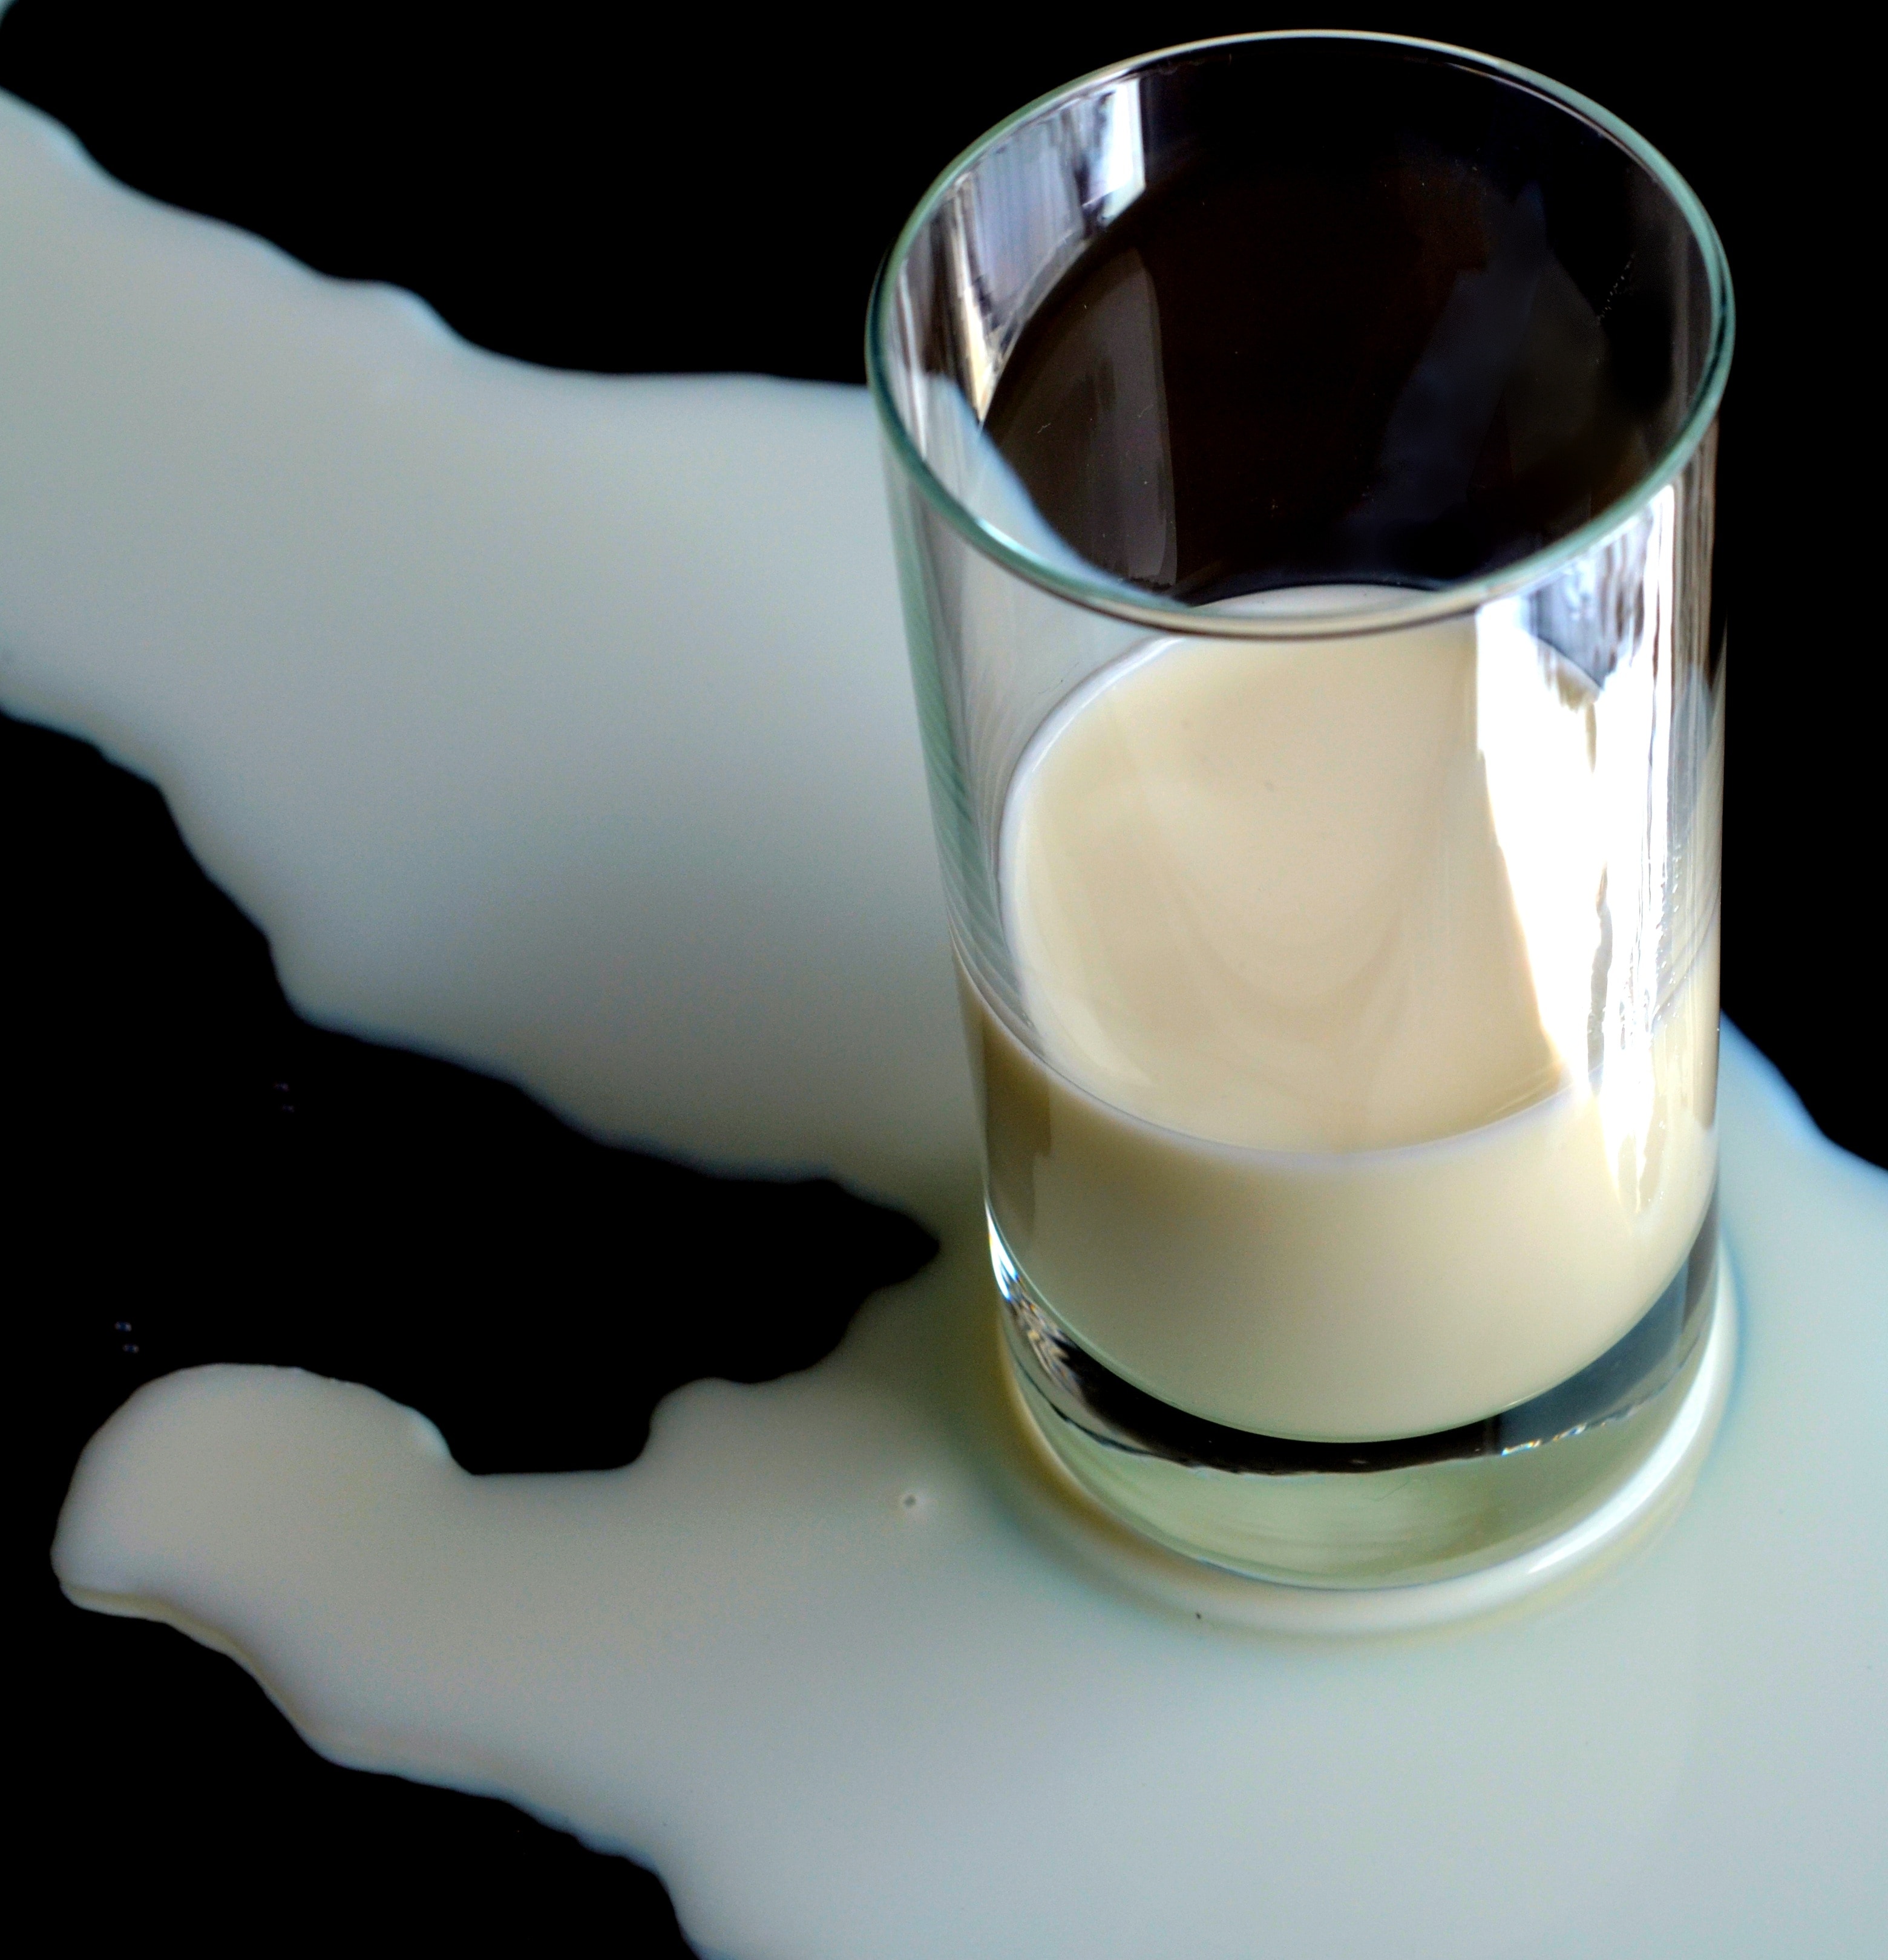 Milk, Glass, White, Sheds, Drink, drinking glass, food and drink